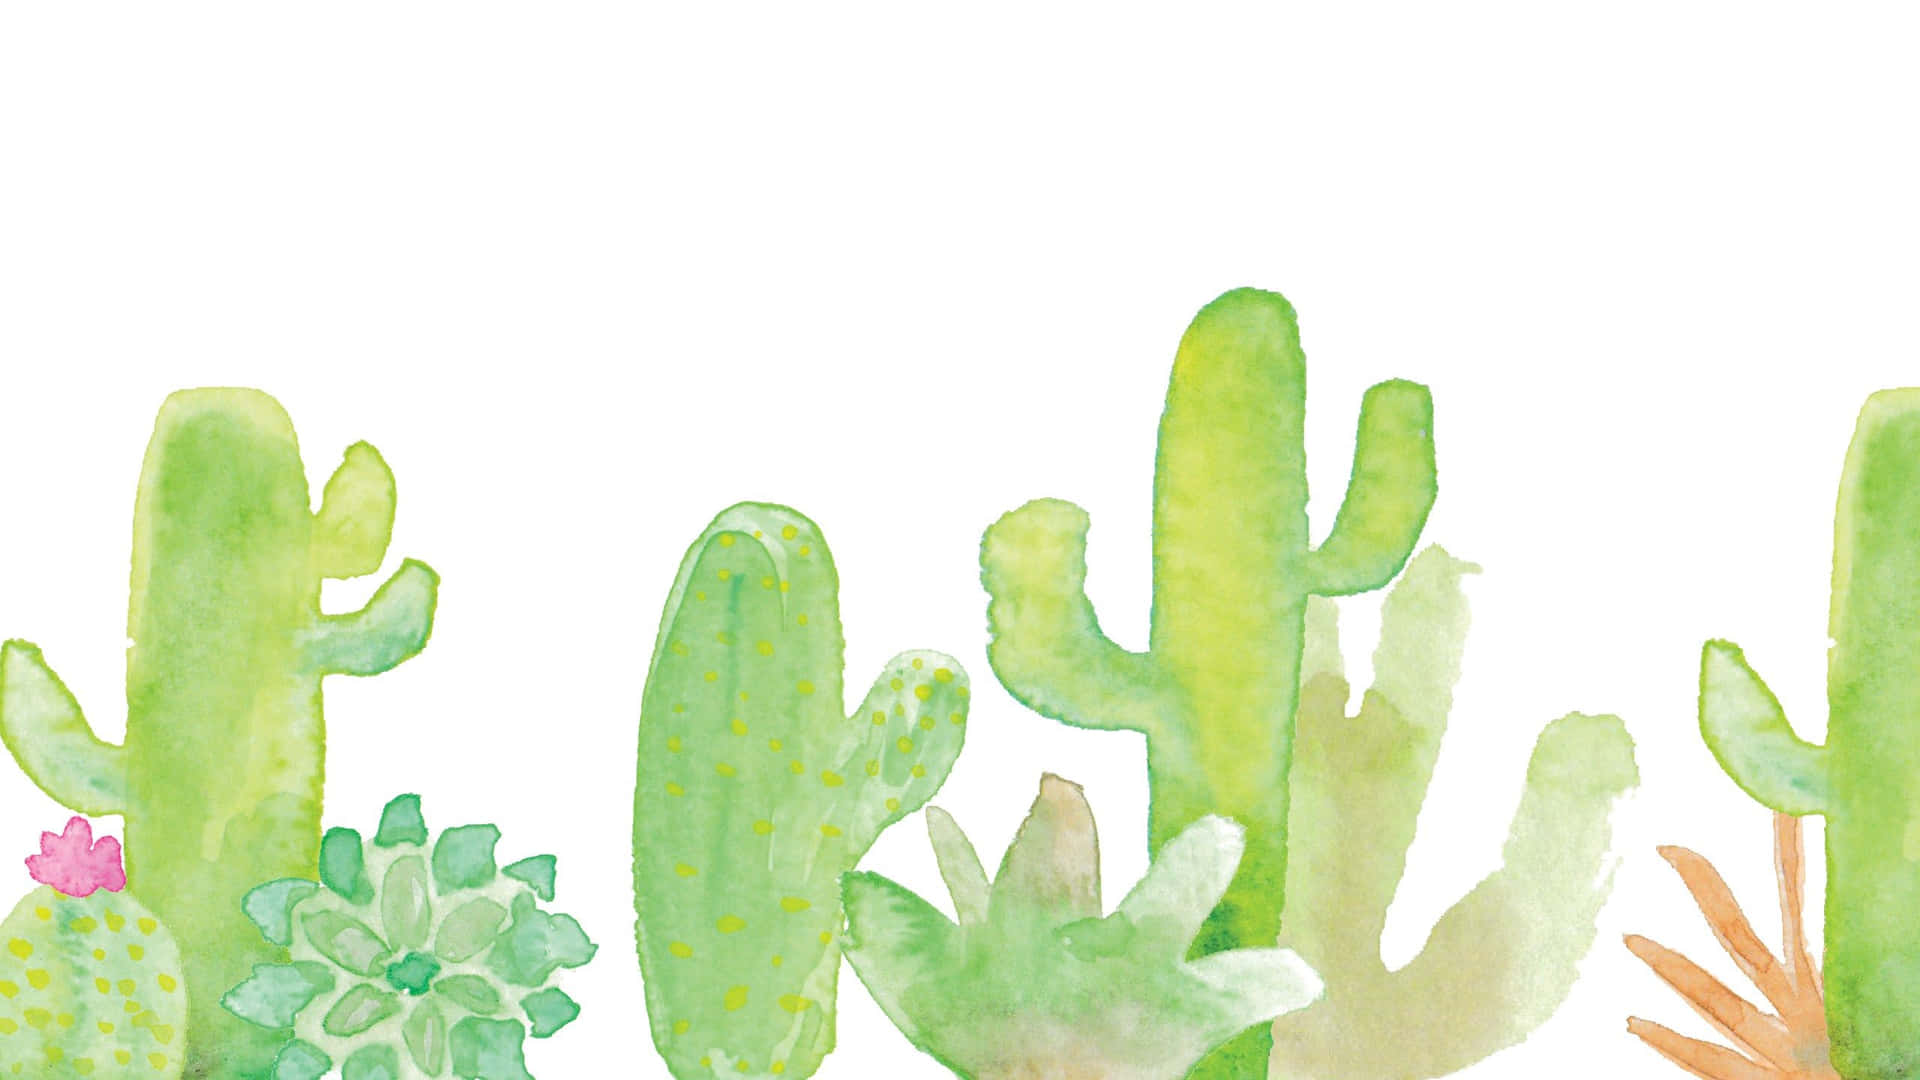 Adorable kawaii cactus surrounded by sweet pastel colors. Wallpaper